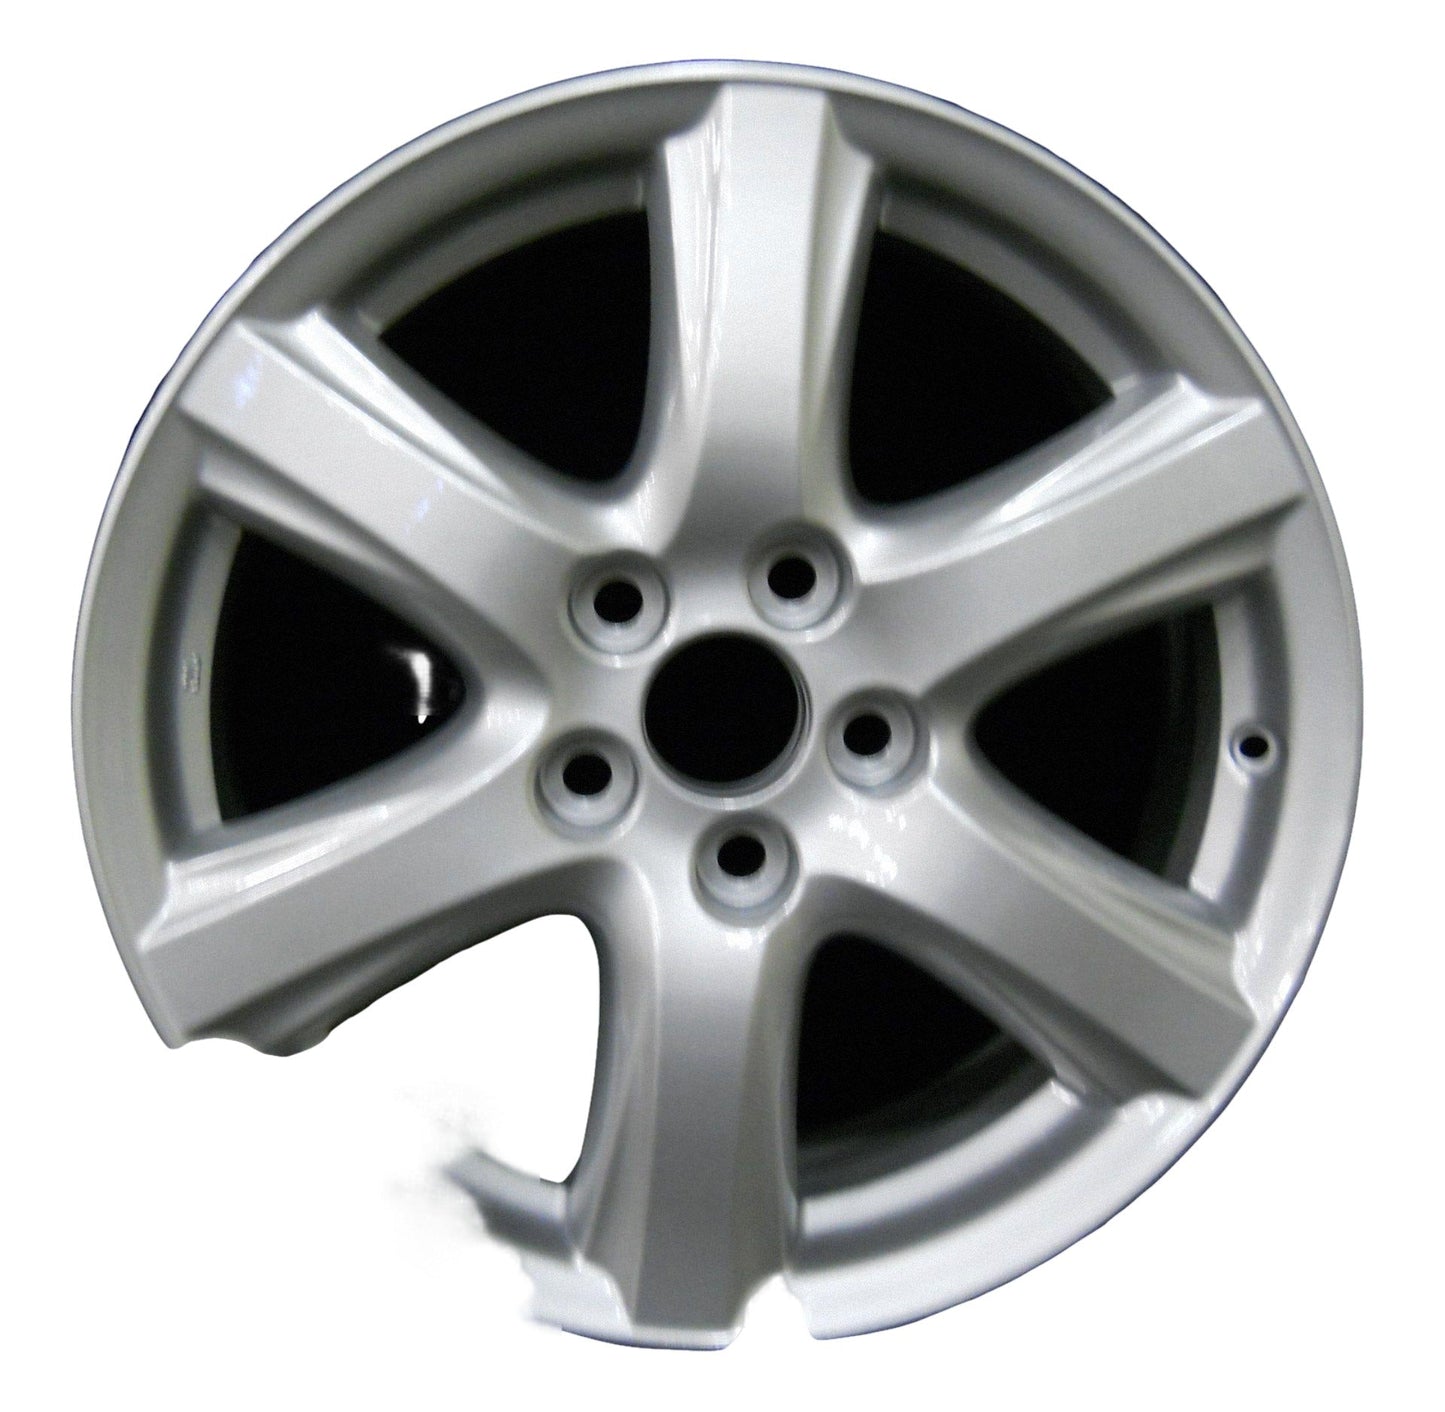 Toyota Camry  2007, 2008, 2009, 2010 Factory OEM Car Wheel Size 17x7 Alloy WAO.69497.LS03.FF